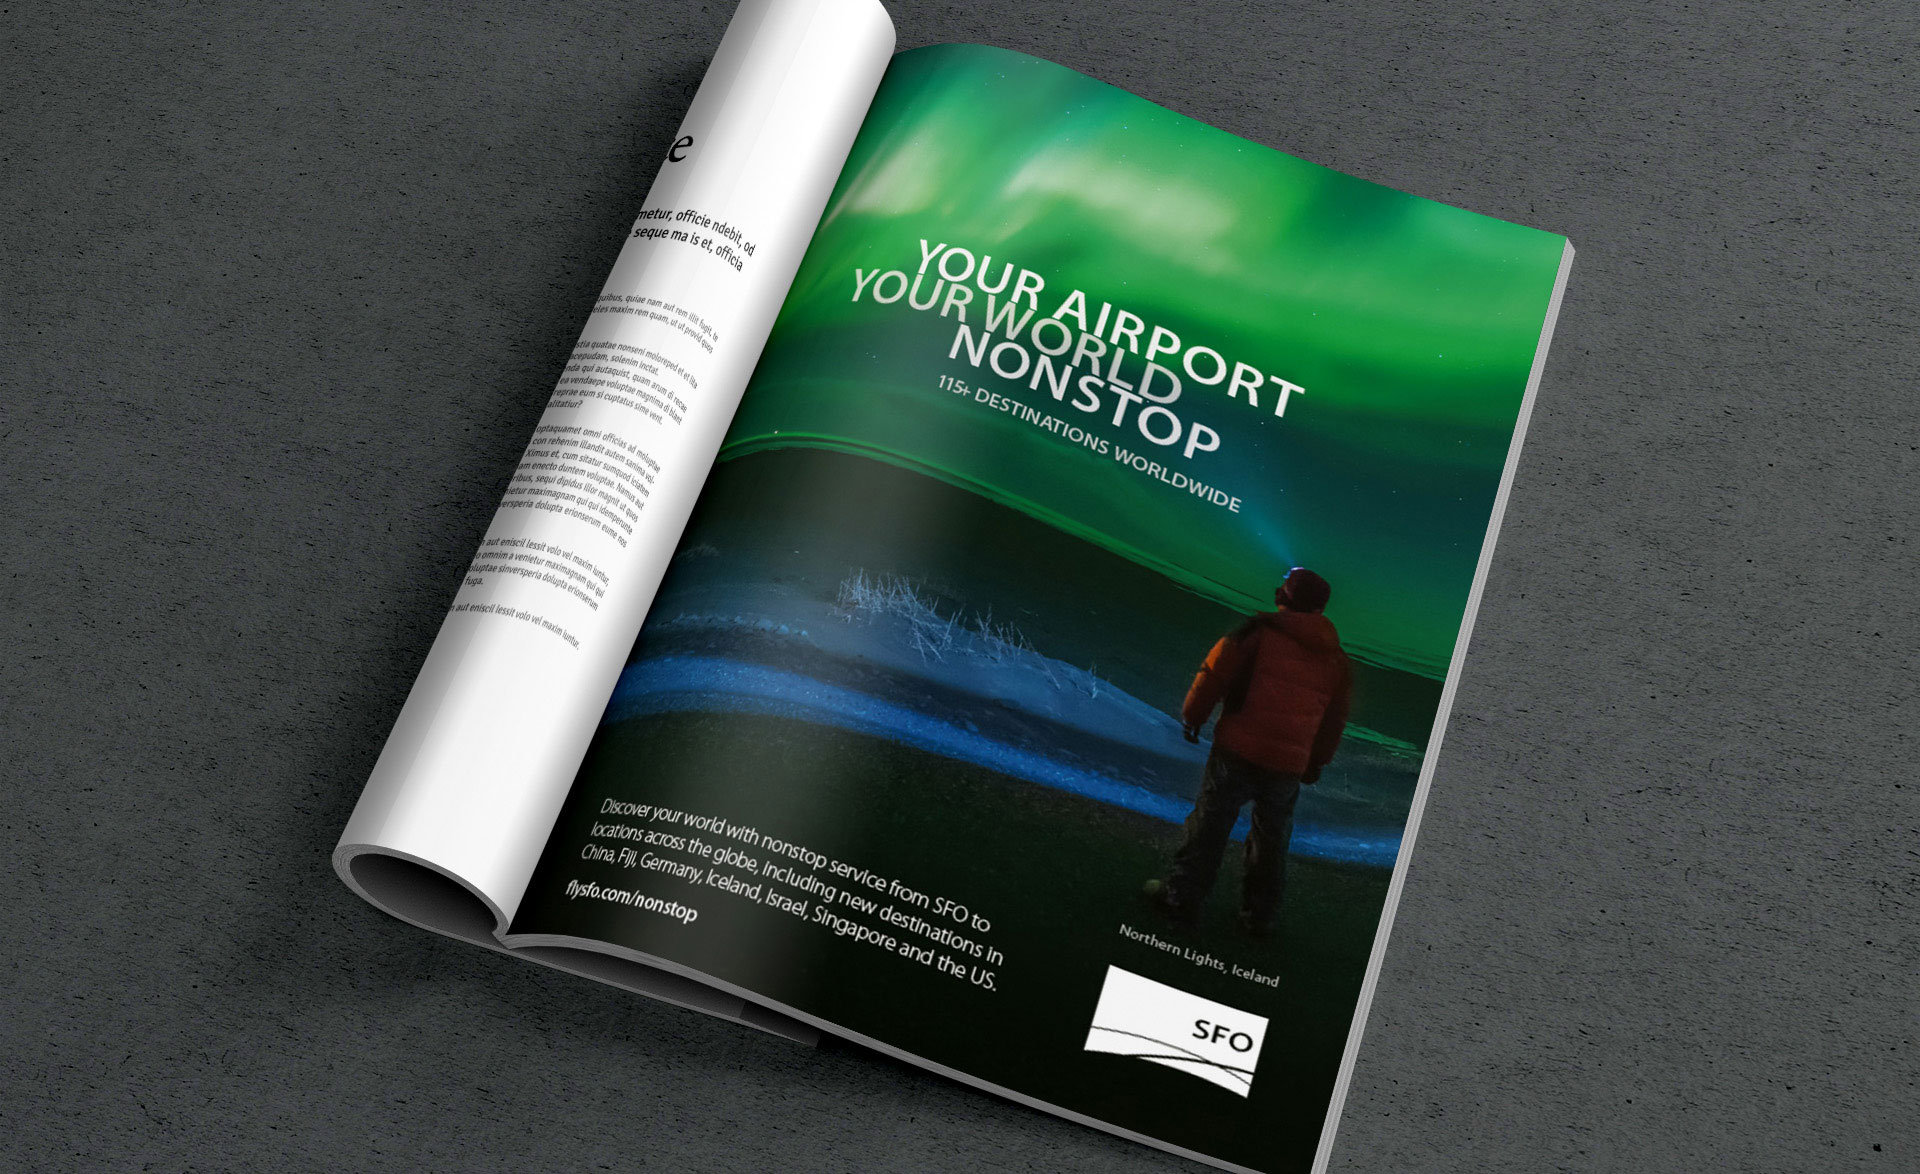 SFO magazine ad: Your Airport, Your World. Nonstop. 115+ Destinations Worldwide.